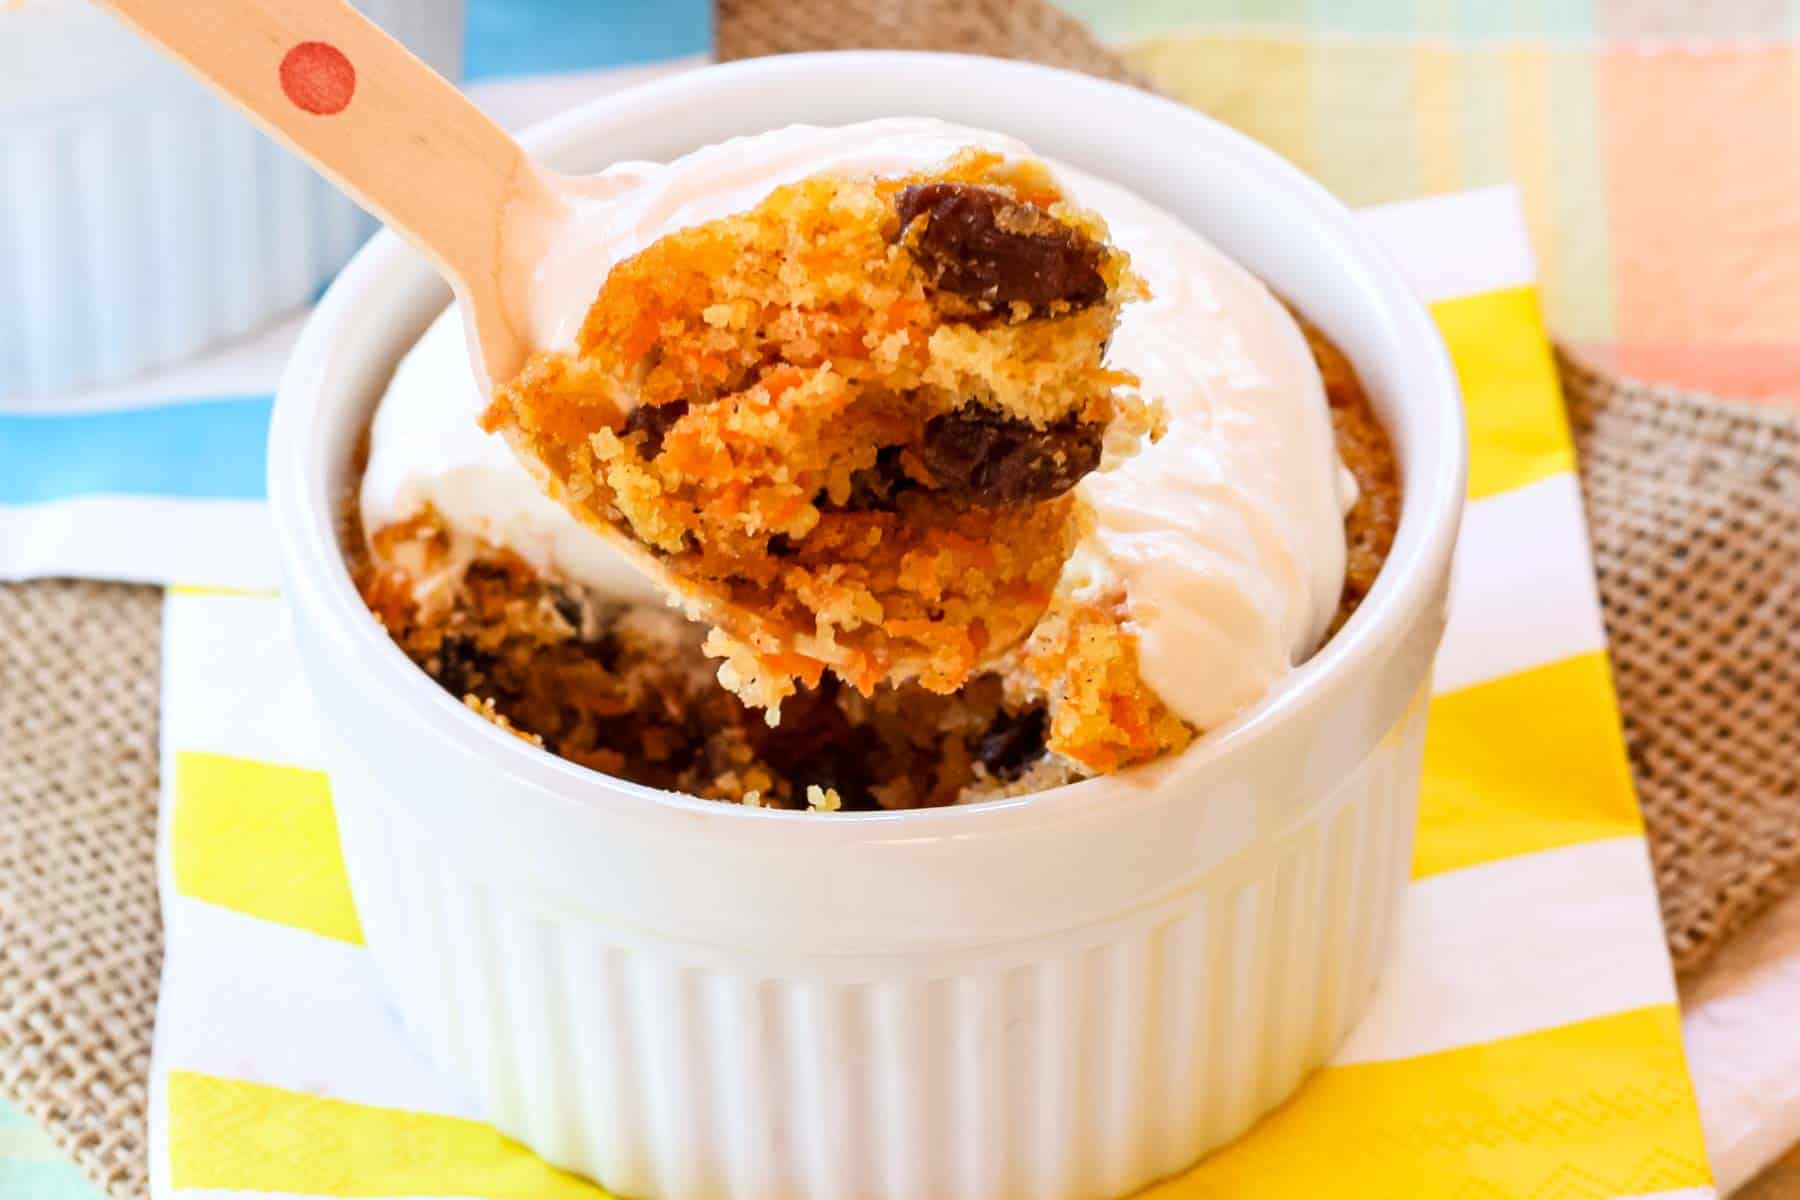 A bite of gluten free carrot cake held over the top of the carrot cake in a ramekin.